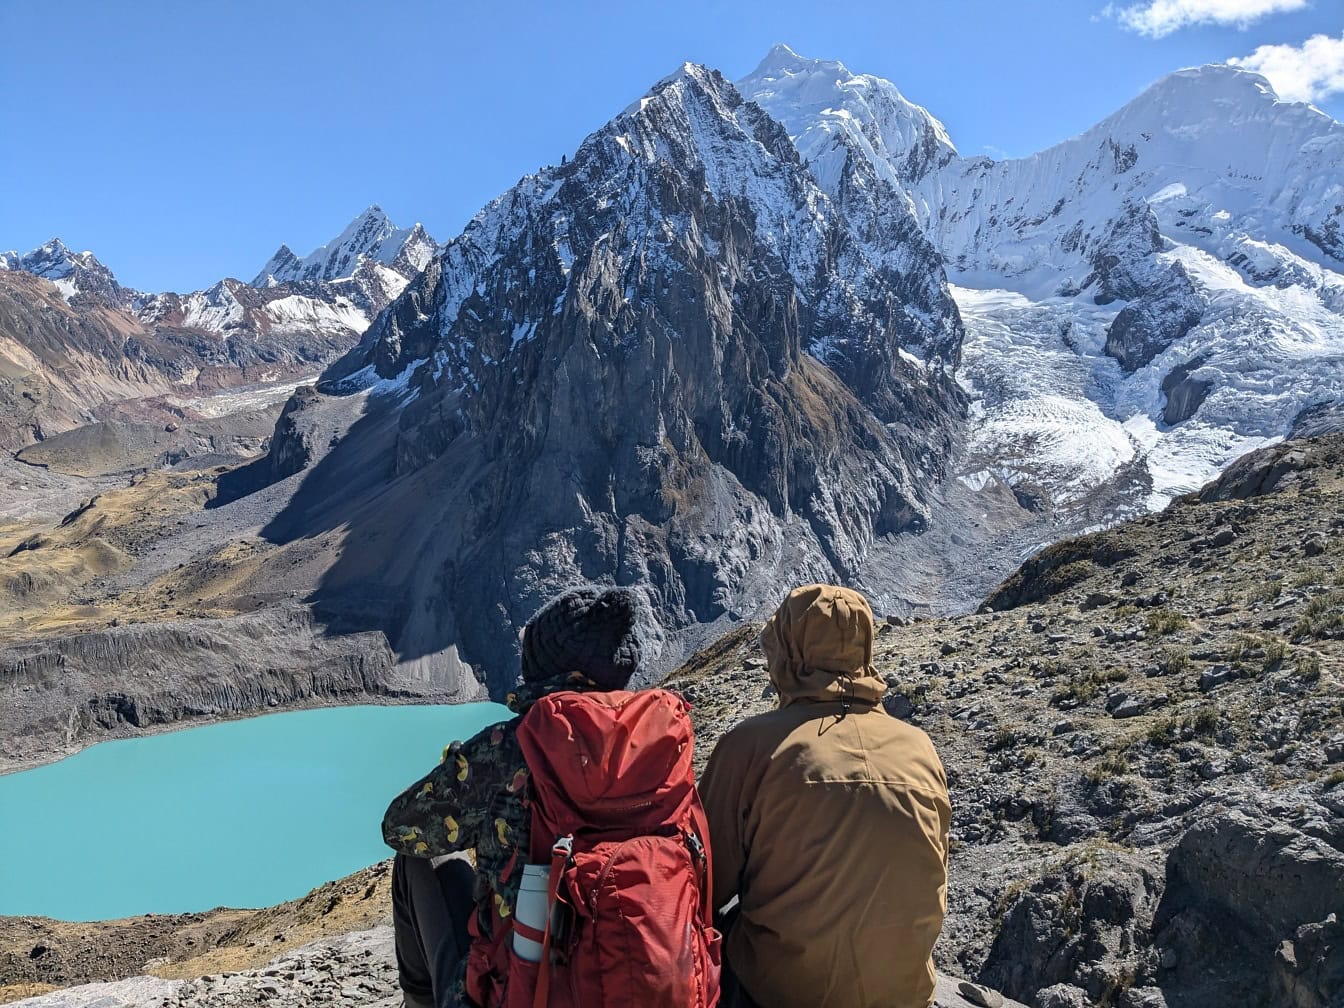 Two people sitting and looking at a lake Palcacocha in a valley with snowy mountain peaks at Cordillera Huayhuash mountain range in Peru